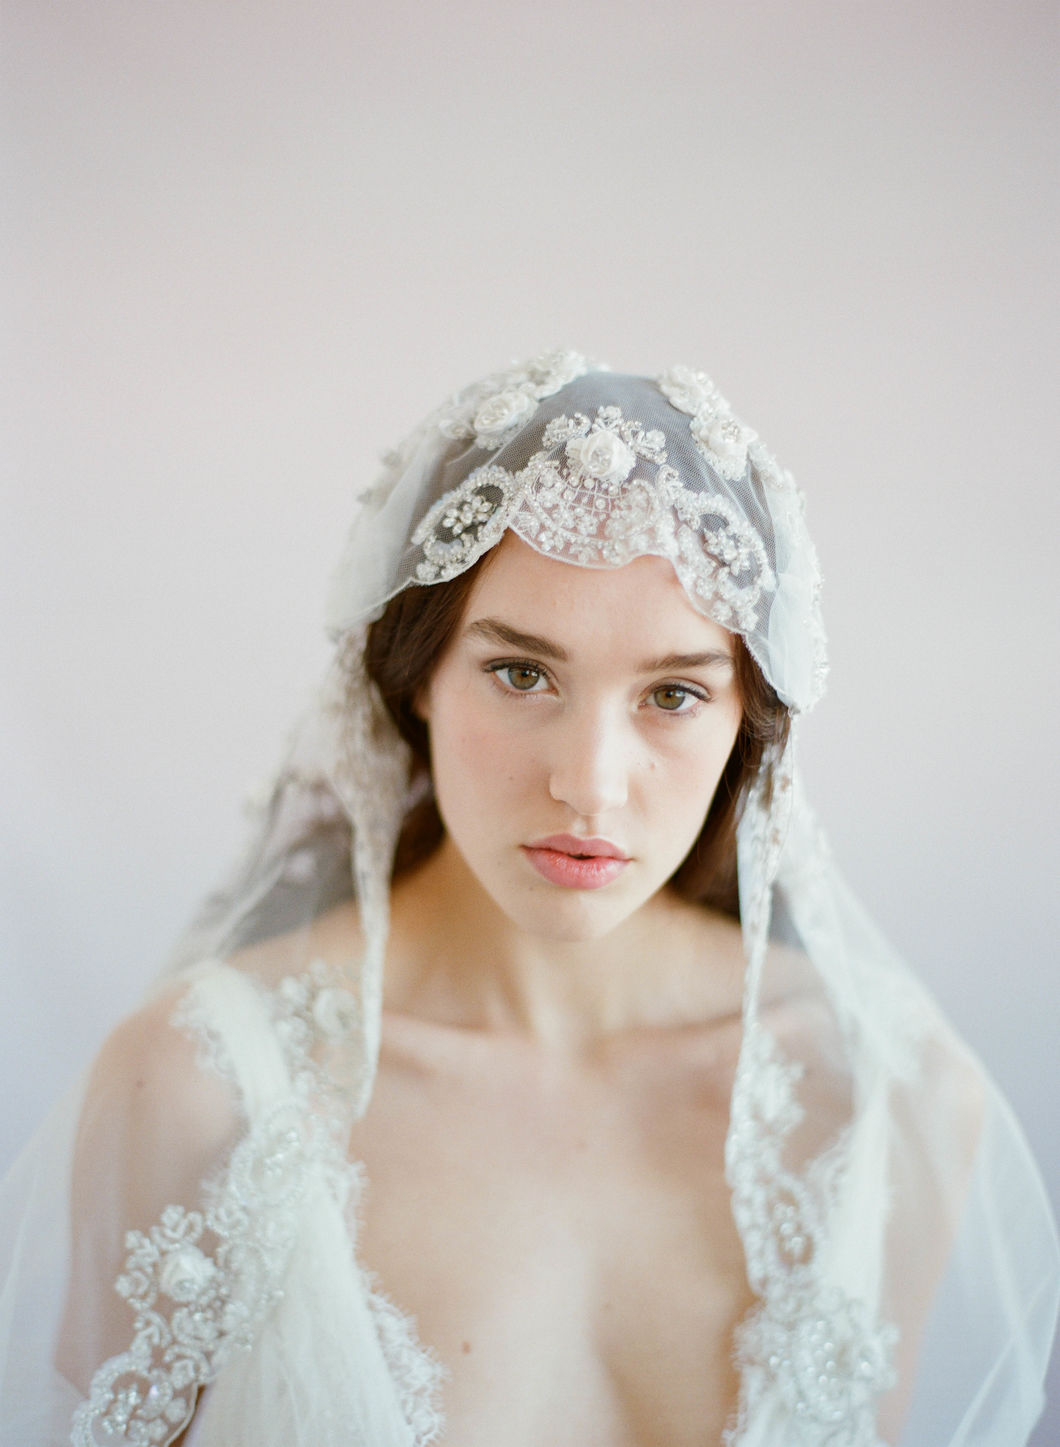 Twigs & Honey Juliet Fingertip, Chapel, and Cathedral Length Veil with Blusher - Style #566 Ivory / Fingertip (As Pictured)